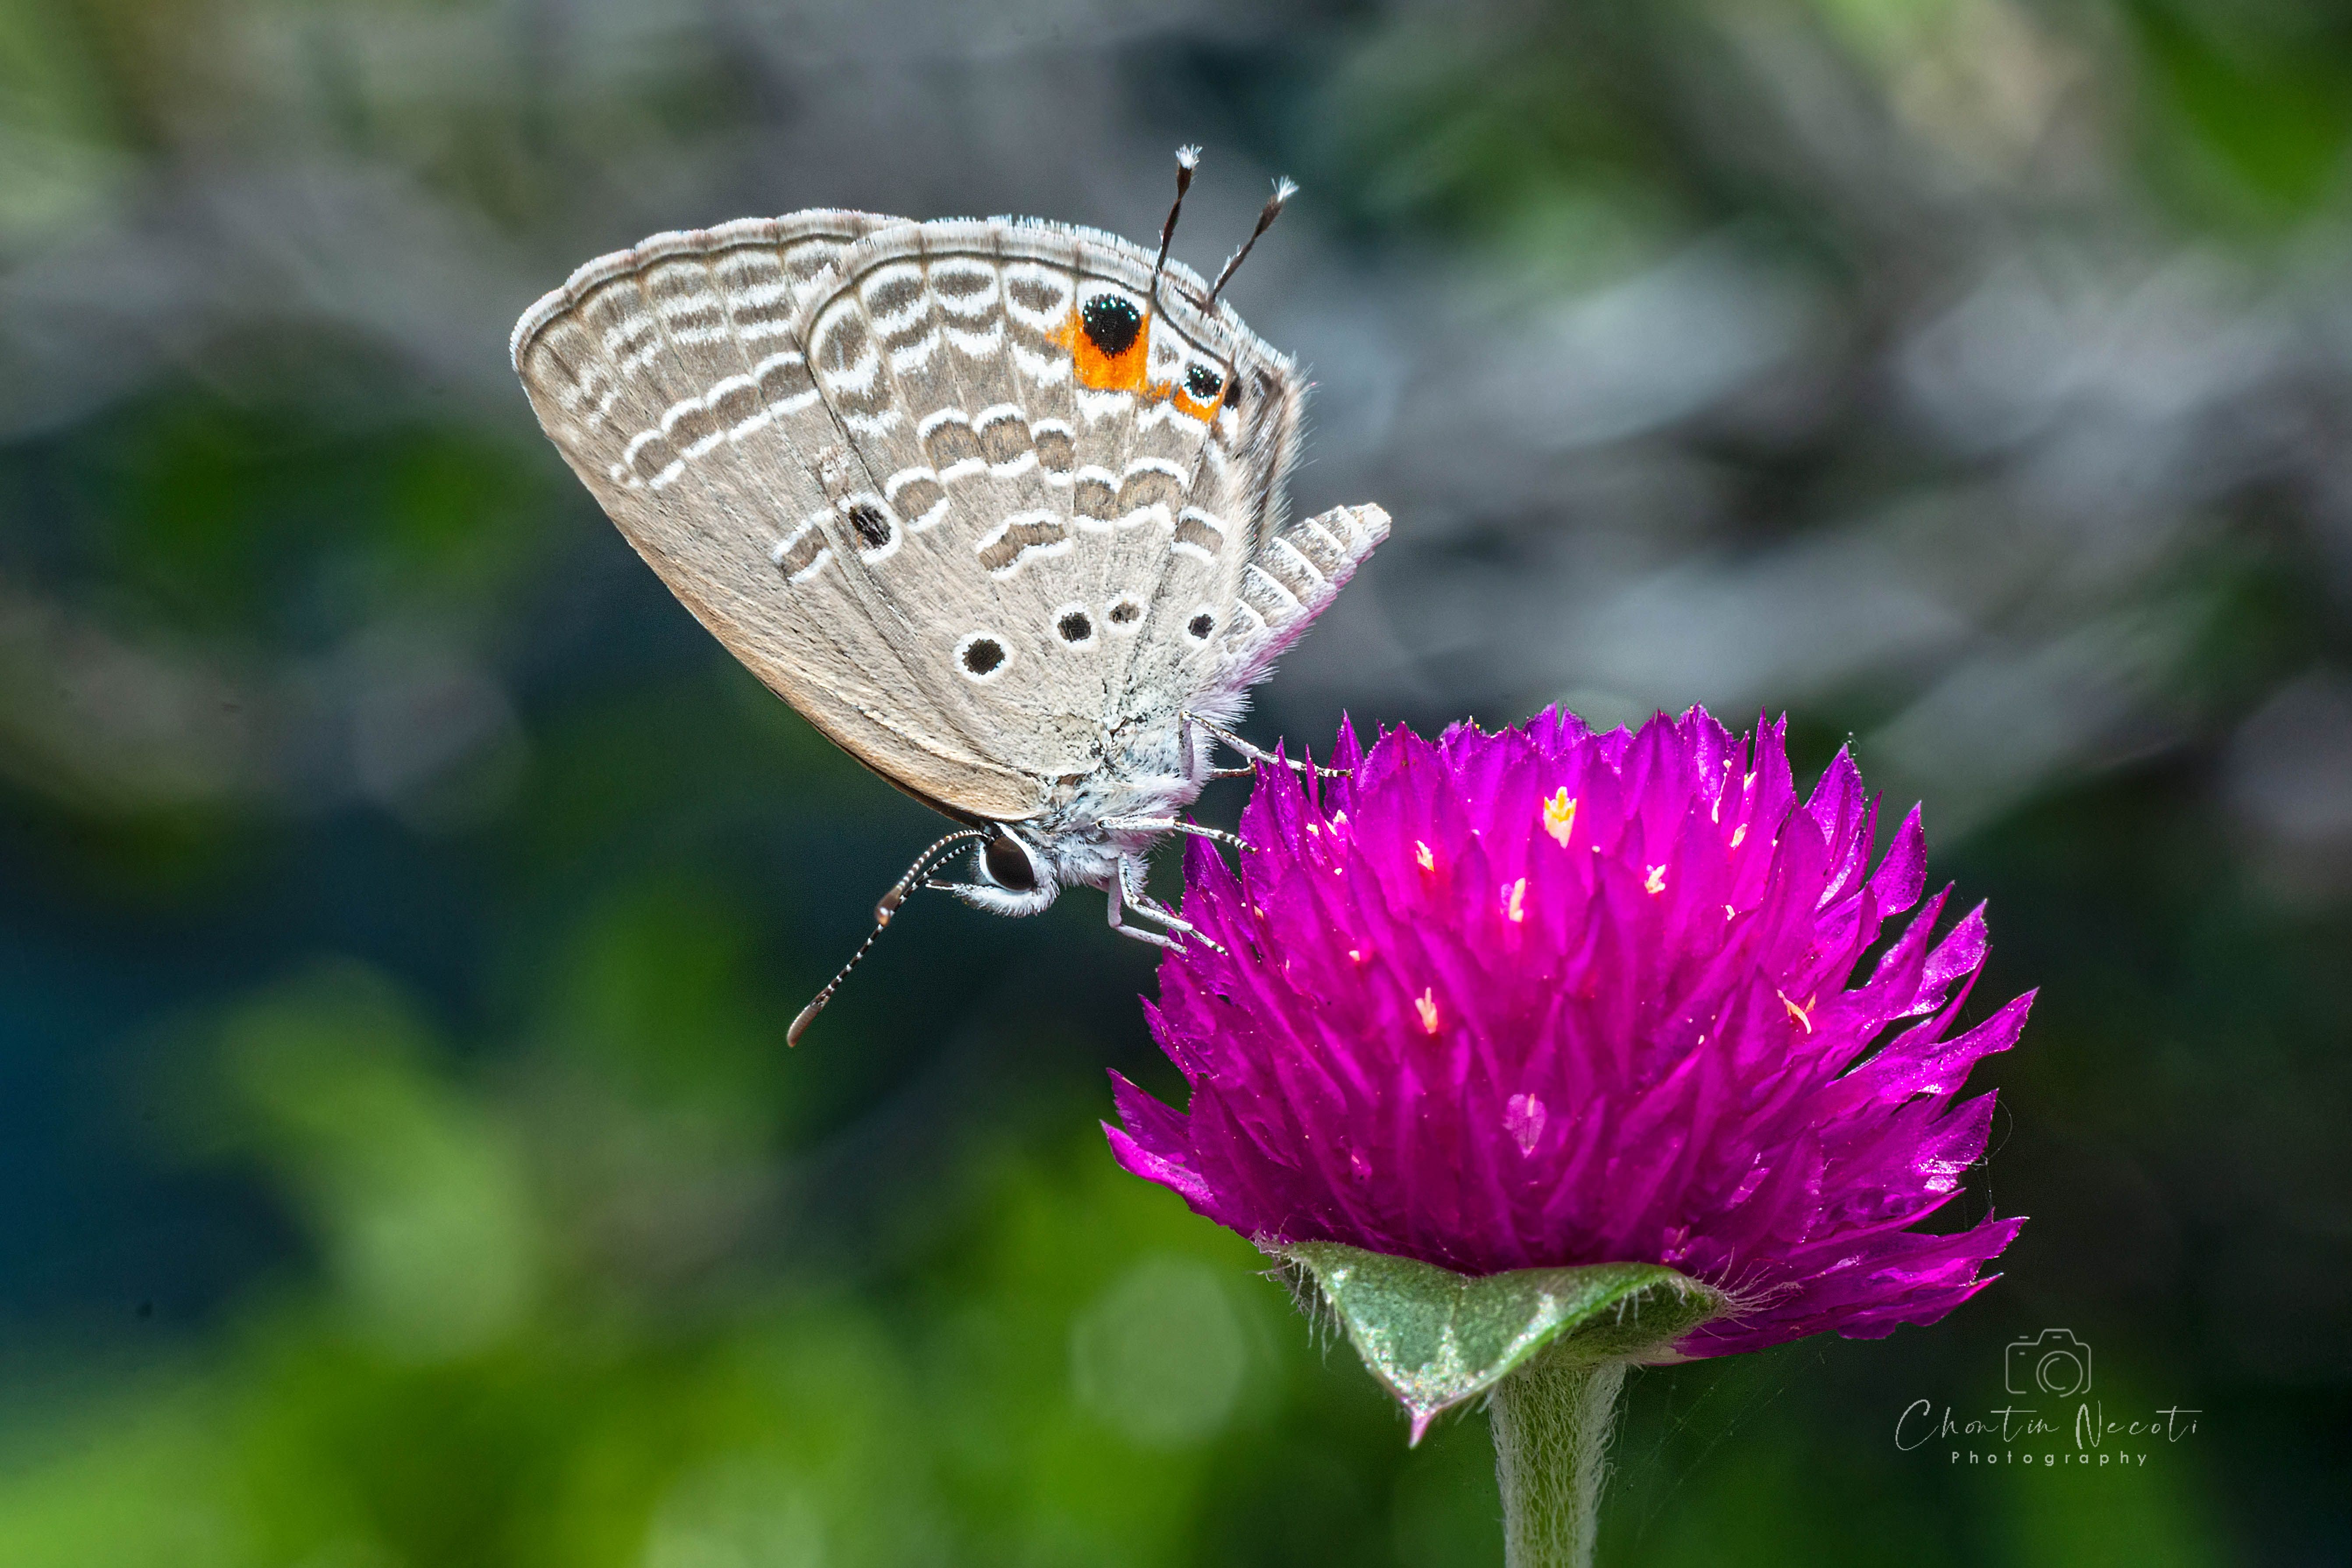 Butterfly, flower, nature, outdoor, insect, animal, small, NeCoTi ChonTin